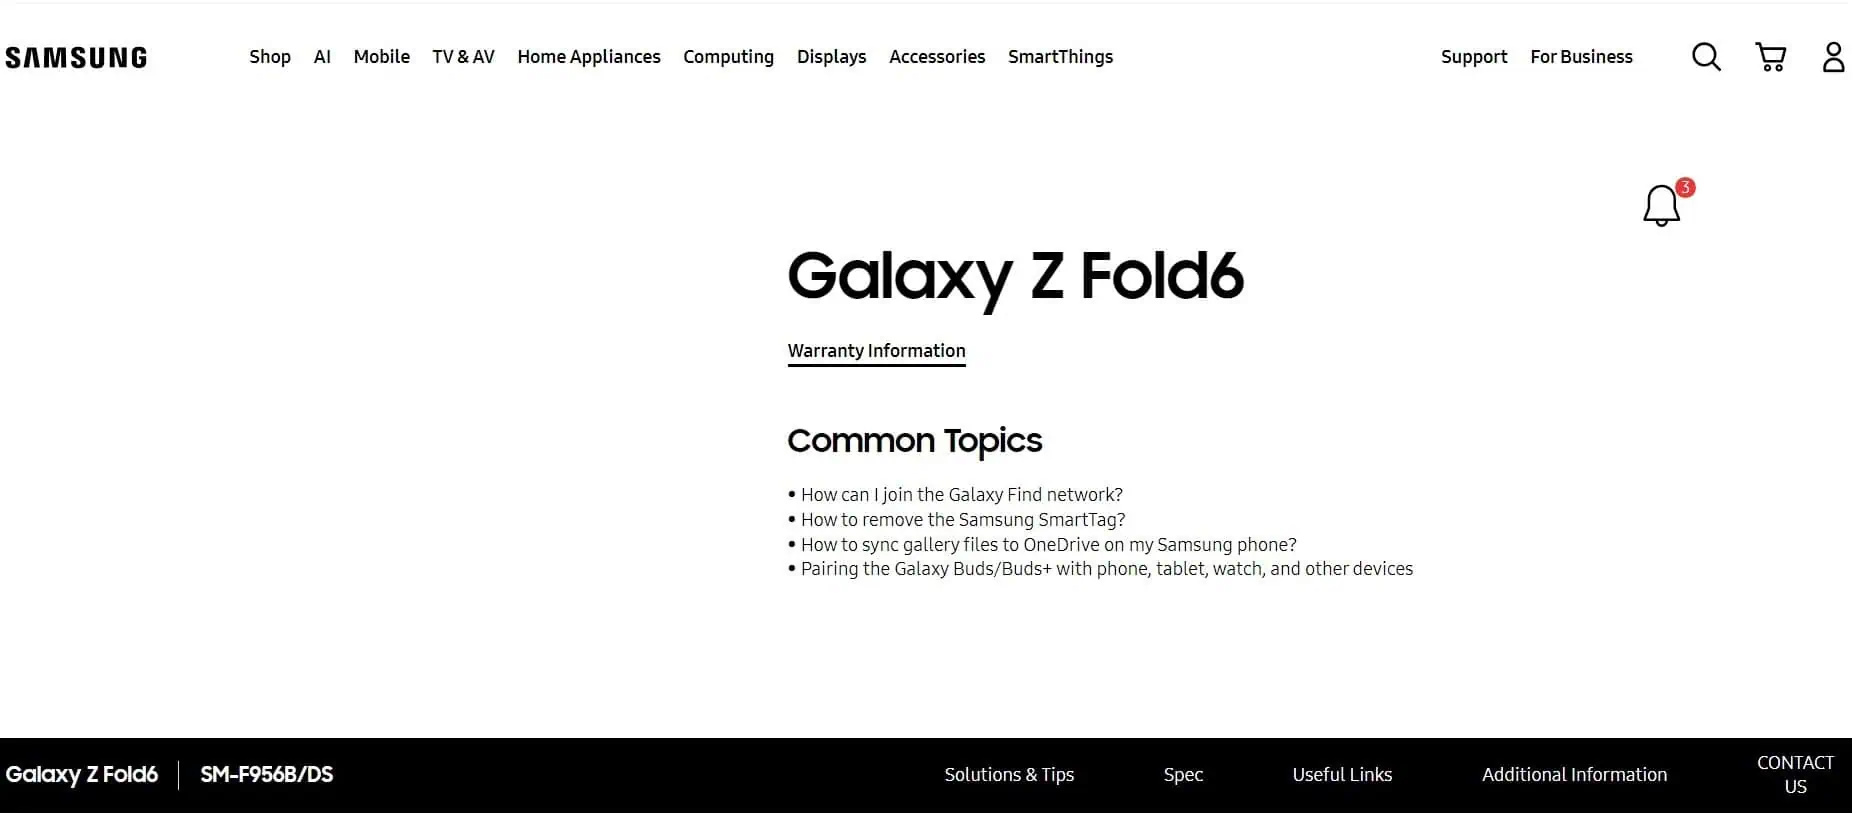 Samsung Galaxy Z Fold 6 official support page